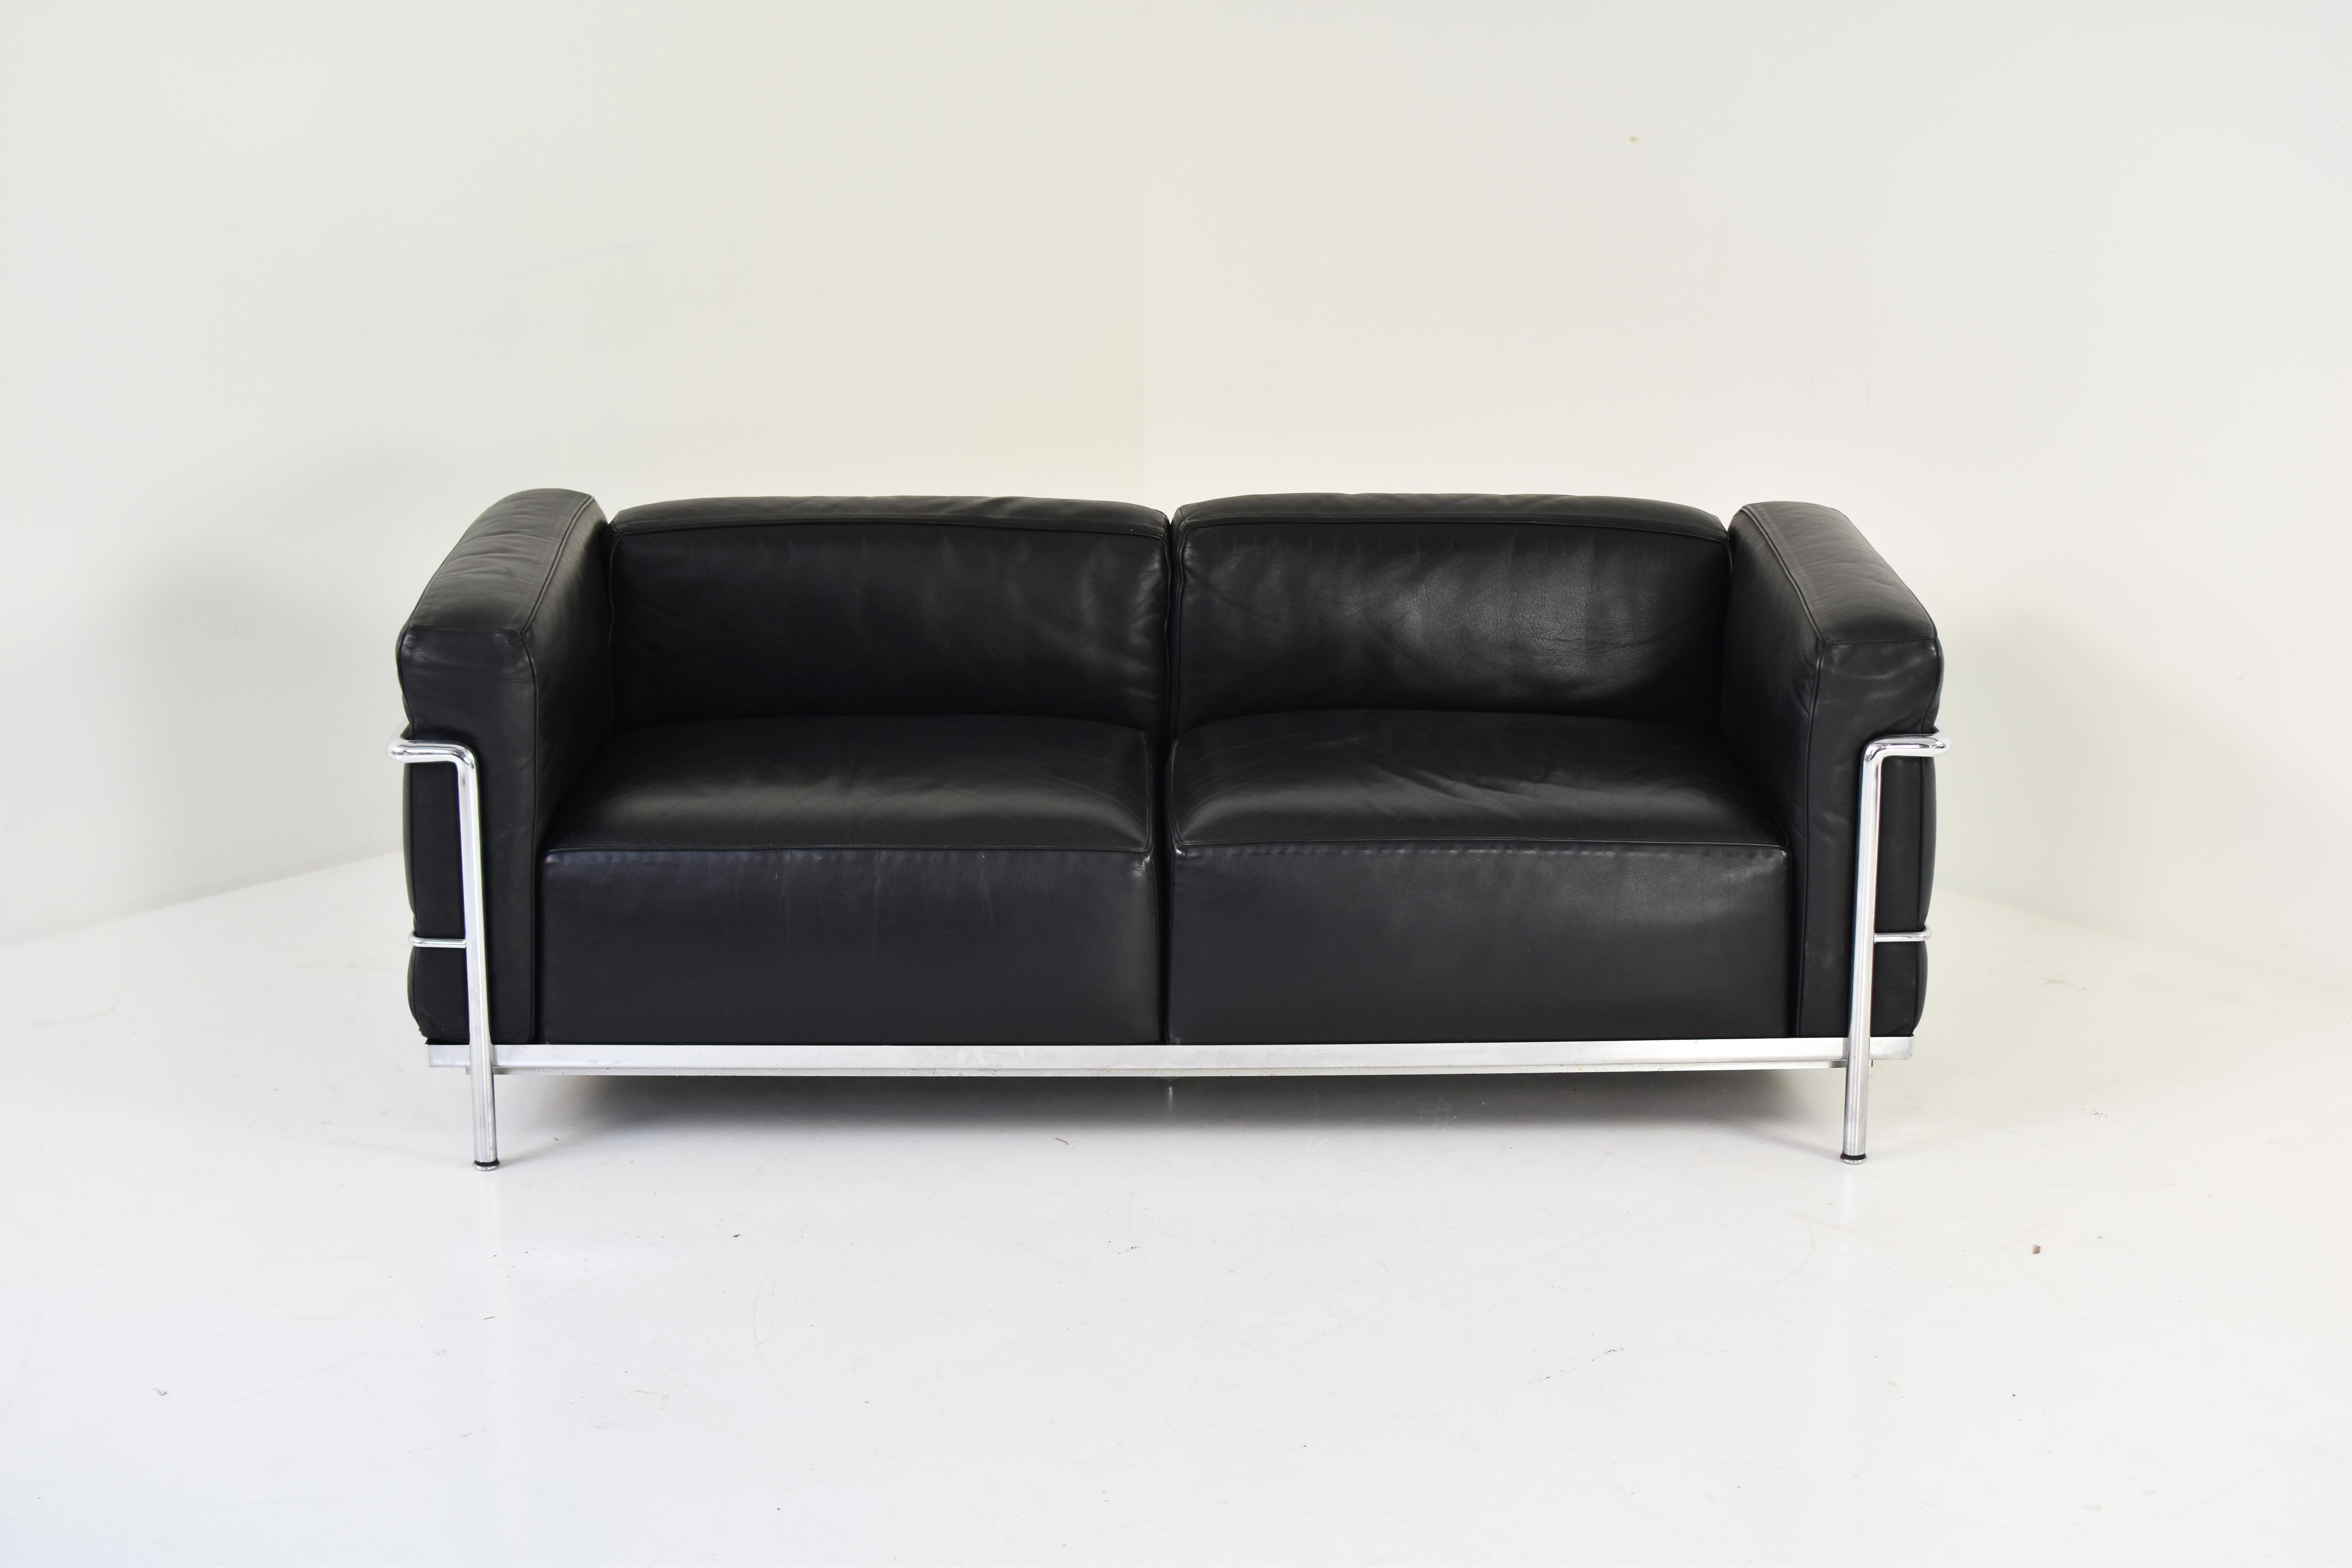 Mid-Century Modern ‘Lc3’ Sofa by Le Corbusier, Pierre Jeanneret and Charlotte Perriand